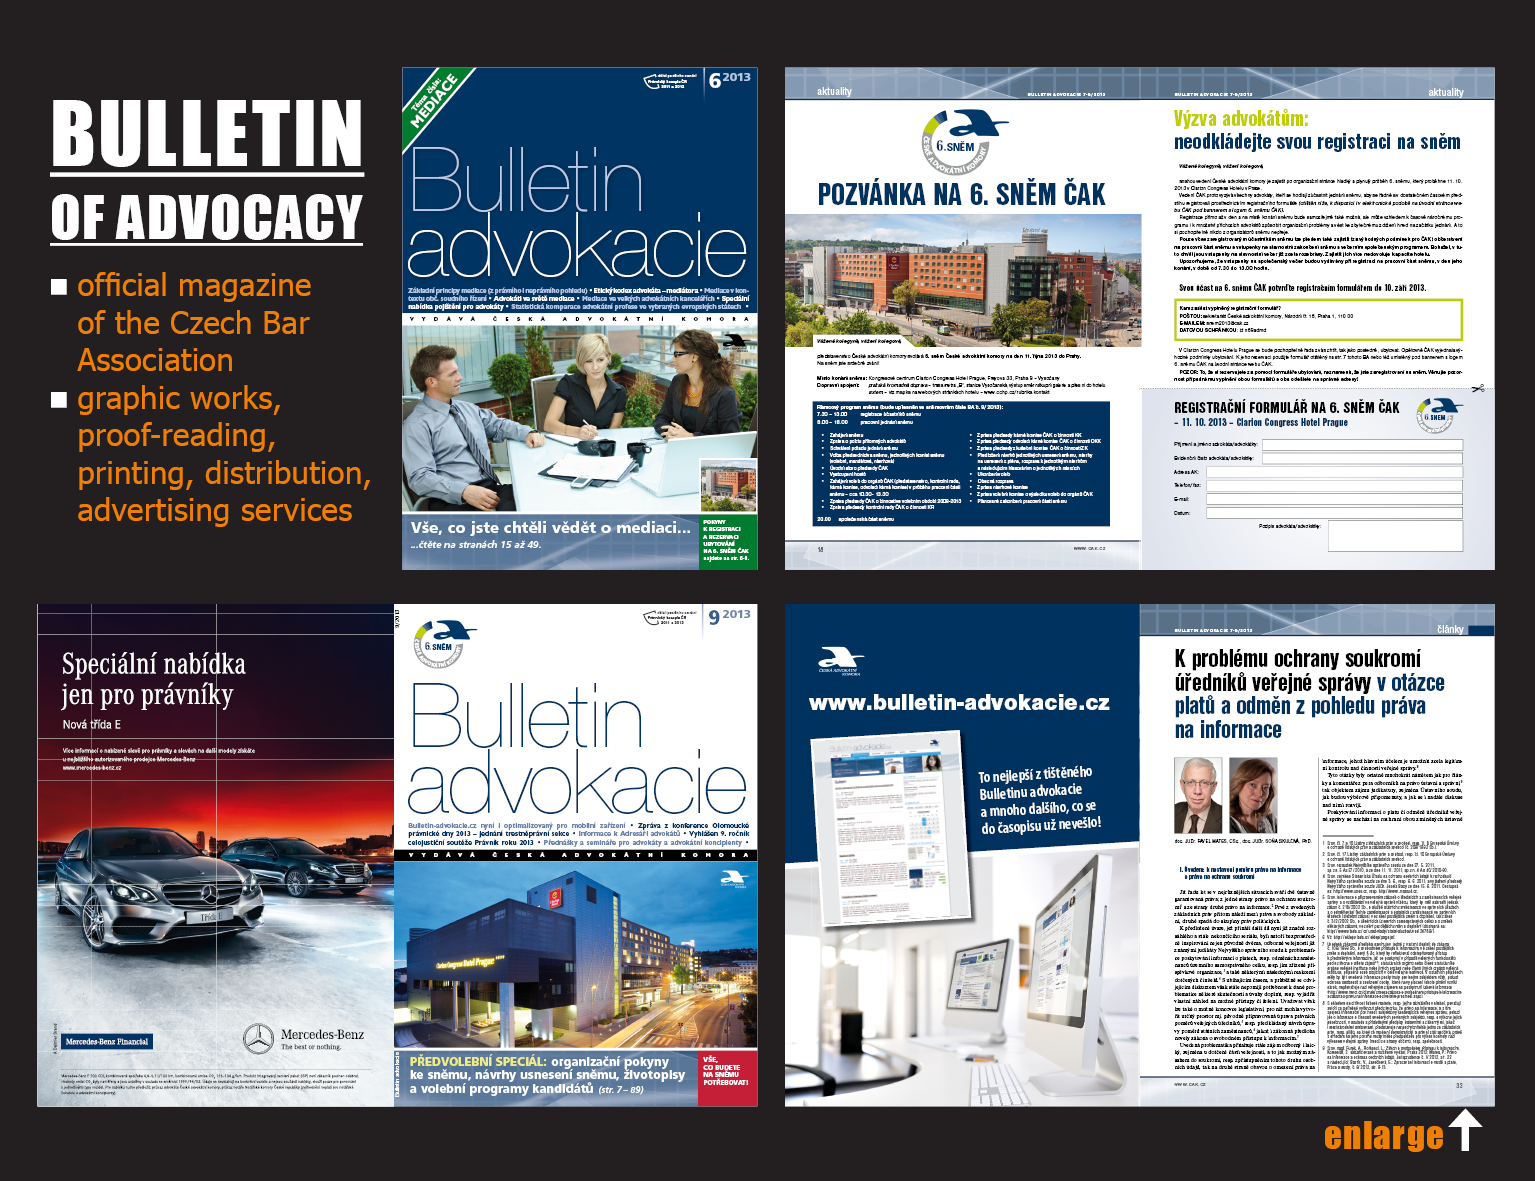 Official magazine of the Czech Bar Association and many other printed materials for the CBA